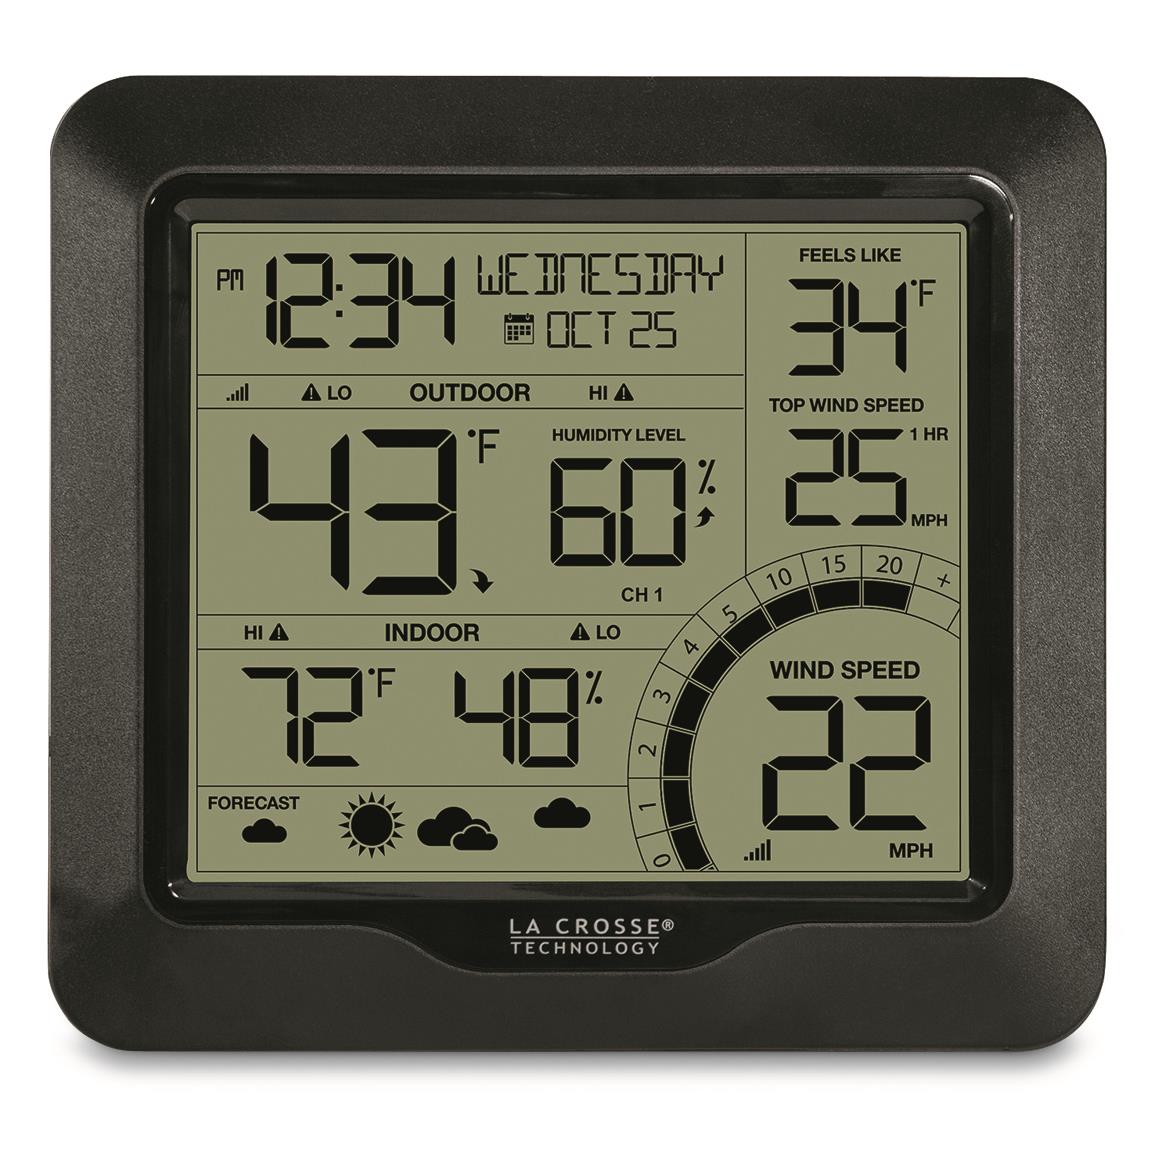 Shows indoor/outdoor temp and humidity